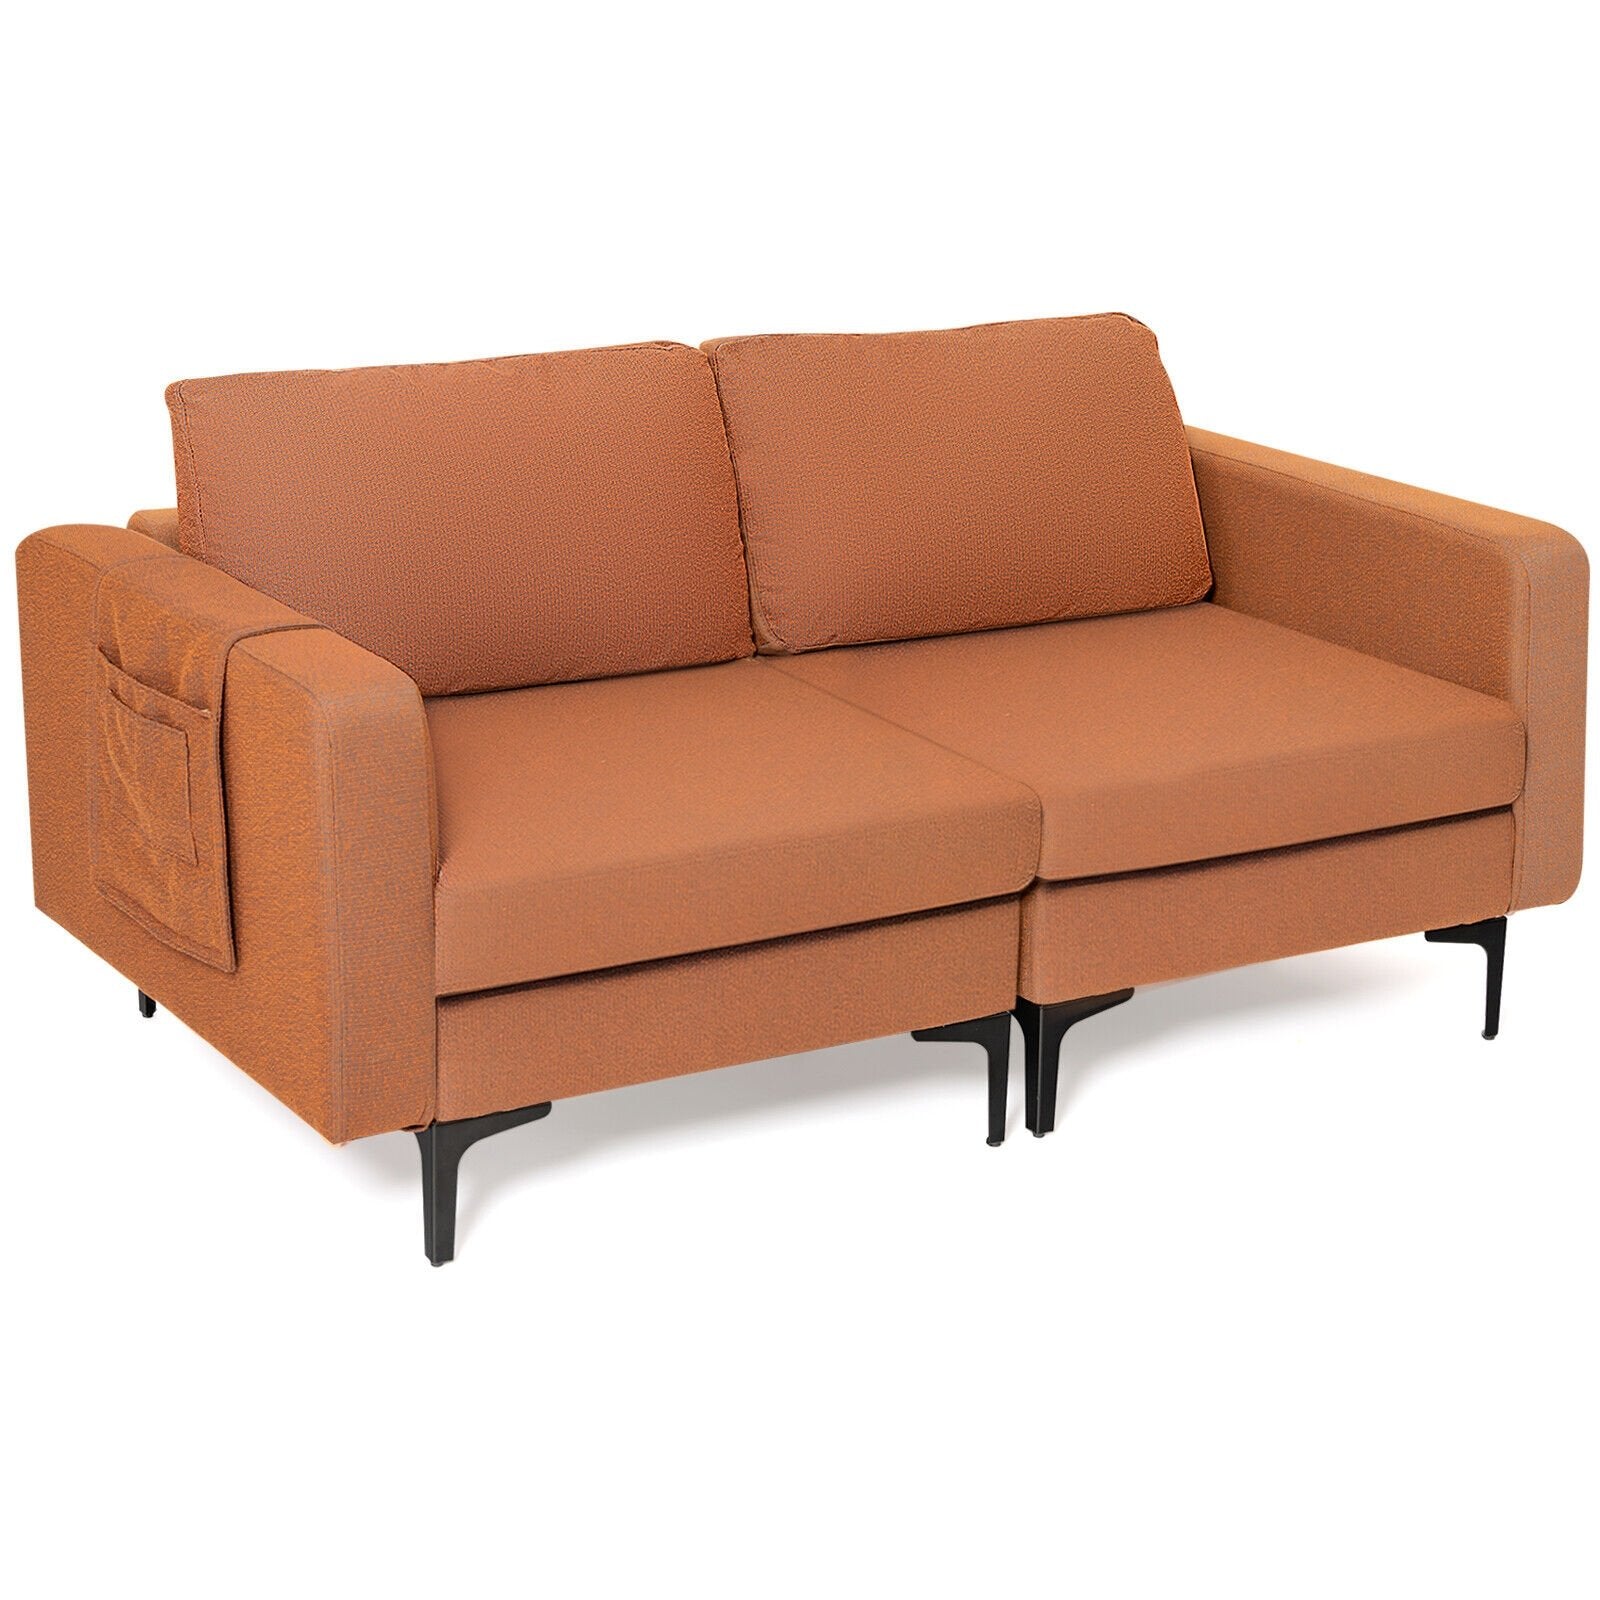 Modern Loveseat Sofa Couch with Side Storage Pocket and Sponged Padded Seat Cushions, Orange - Gallery Canada